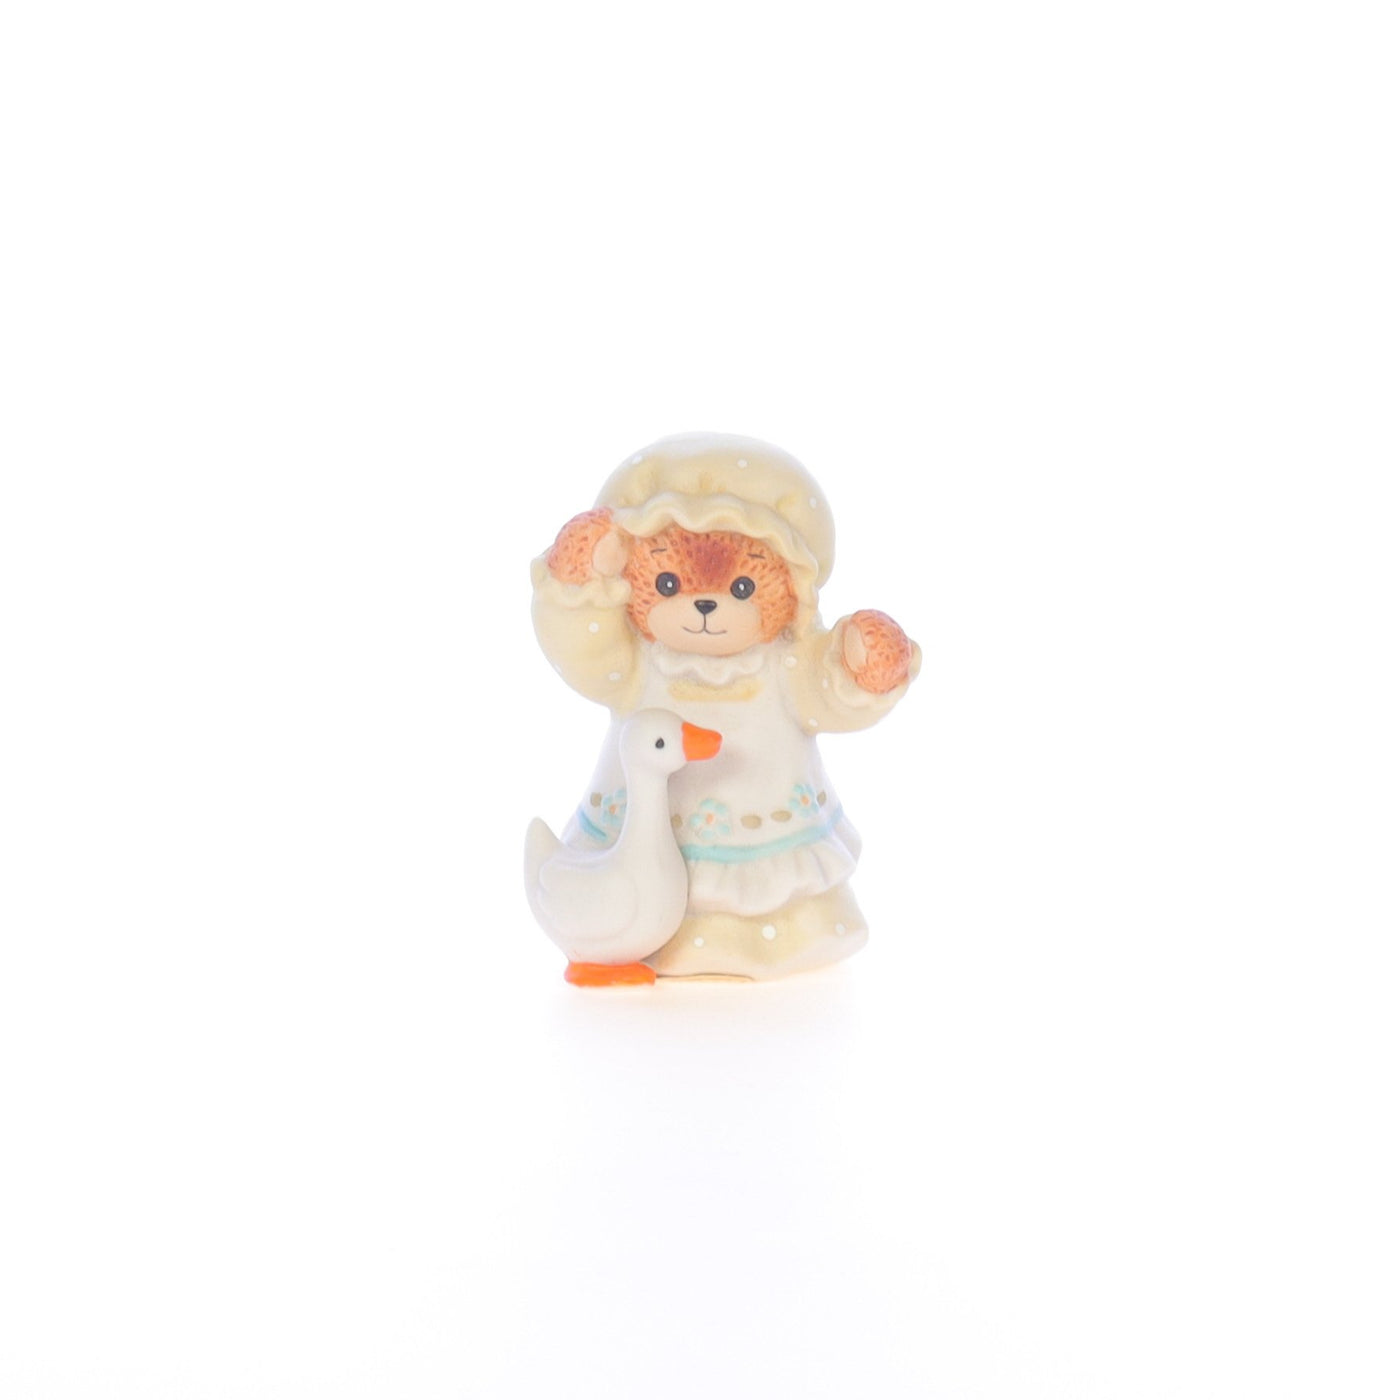 Lucy_And_Me_by_Lucy_Atwell_Porcelain_Figurine_Bear_with_Bonnet_and_Goose_Lucy_Unknown_014_01